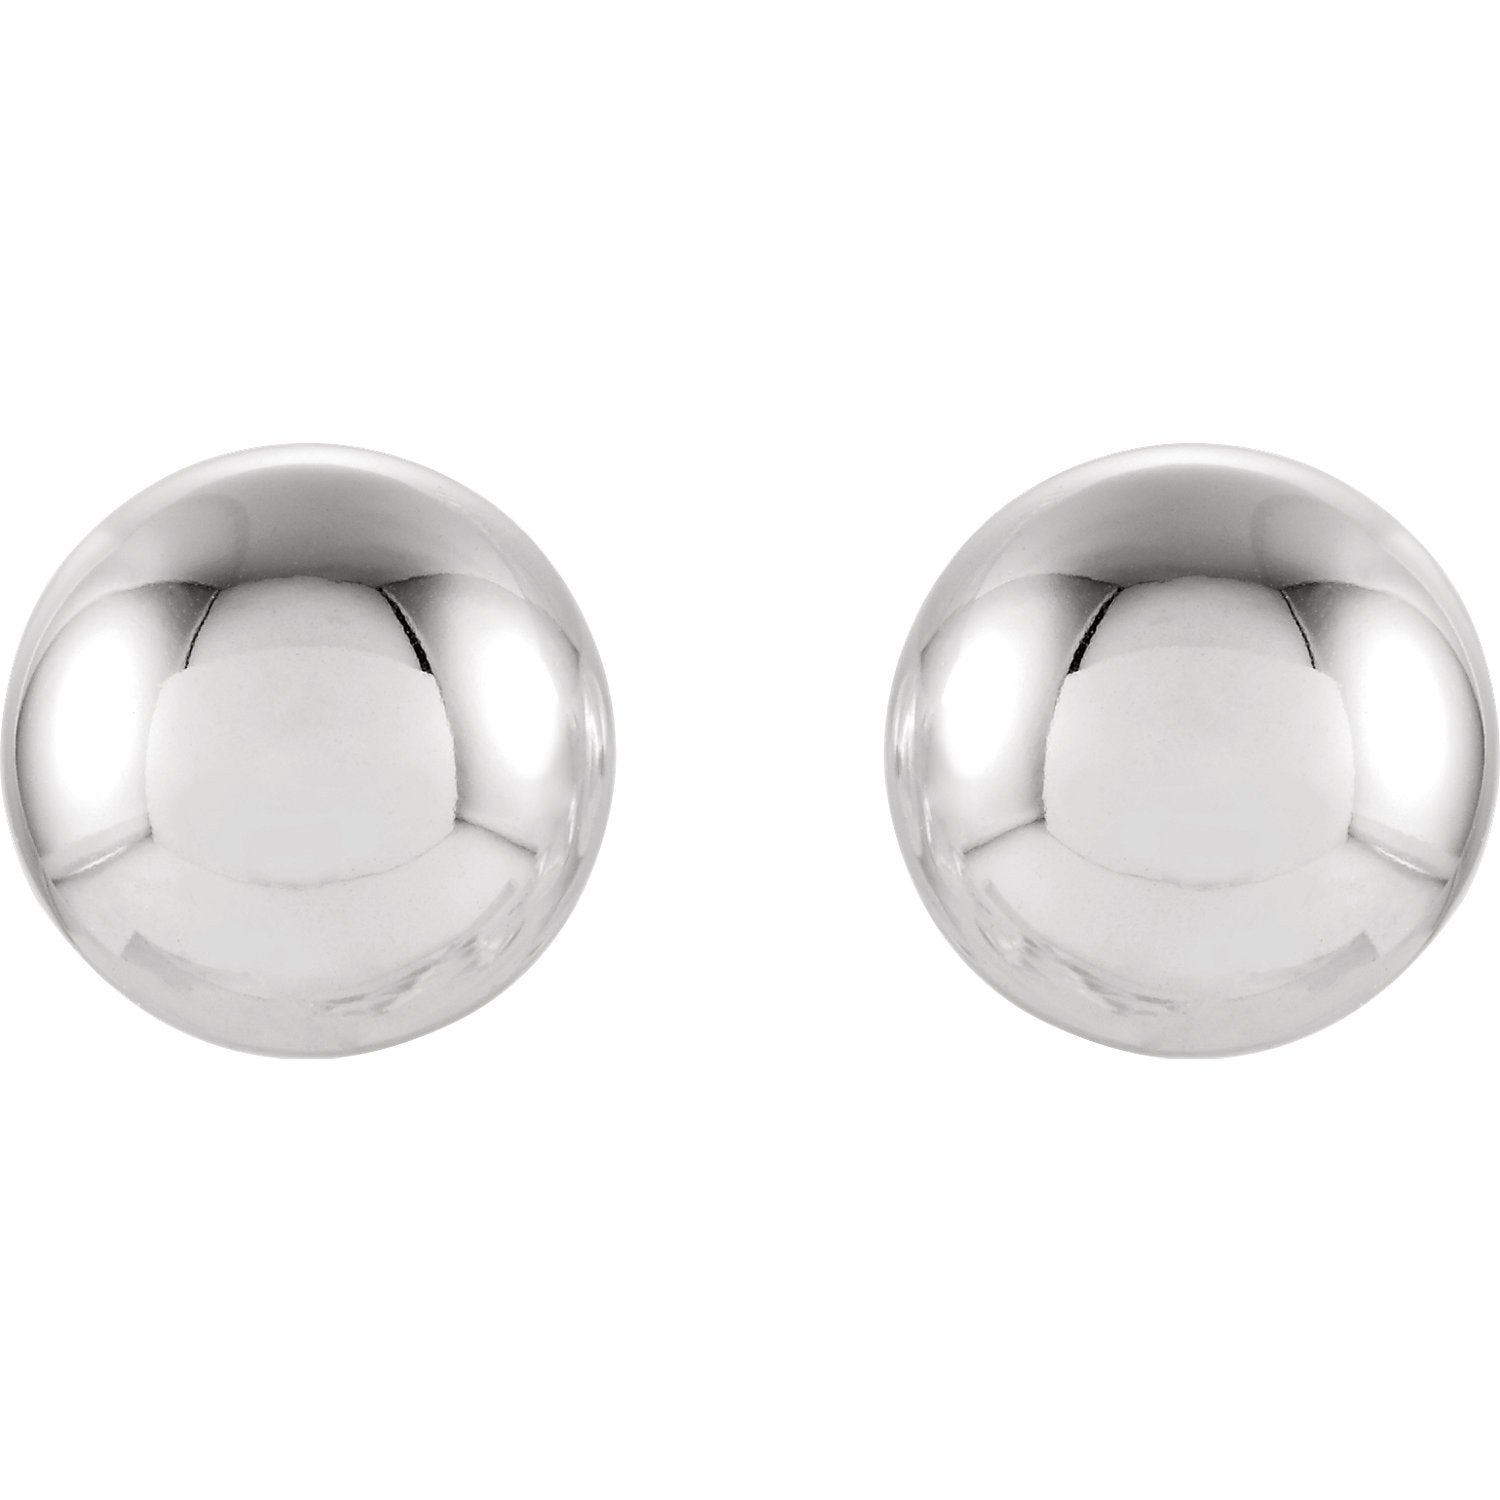 7mm Ball Earrings with Bright Finish - 14K Gold (Yellow or White)